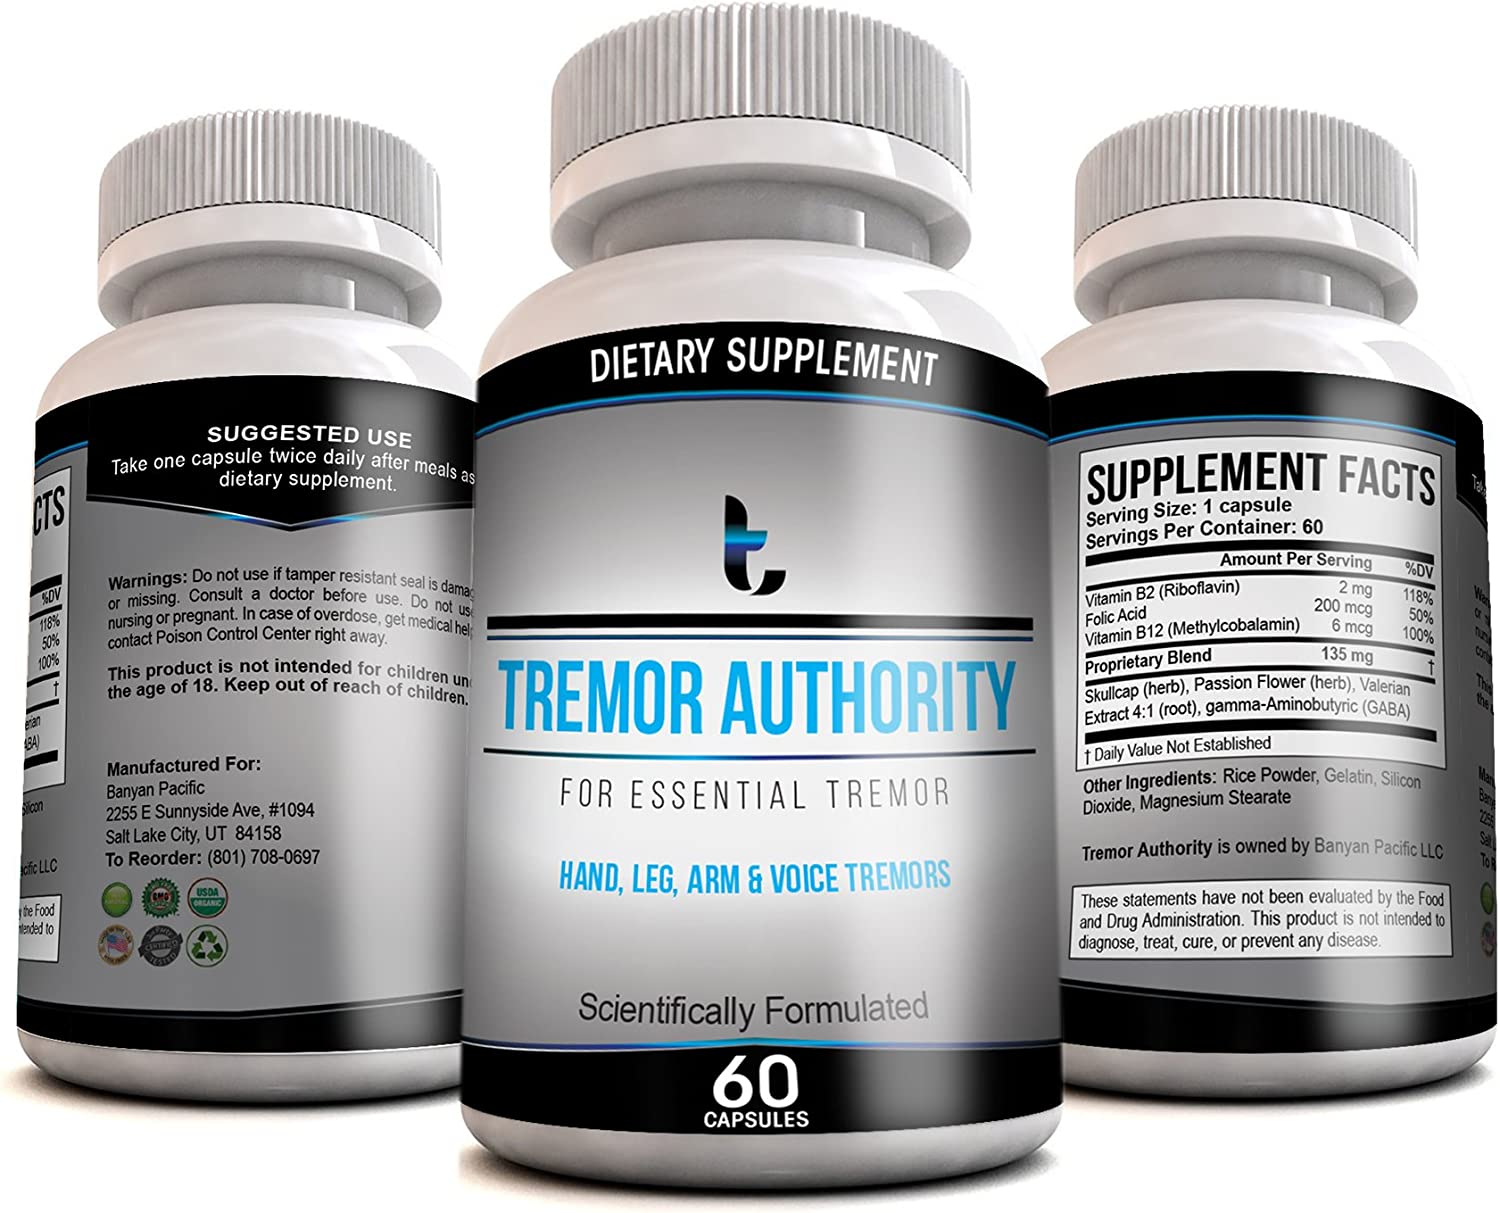 Tremor Authority - A Natural Aid for Essential Tremor - Provides Relief for Shaky Hands, Arm, Leg, Voice Tremors (1)